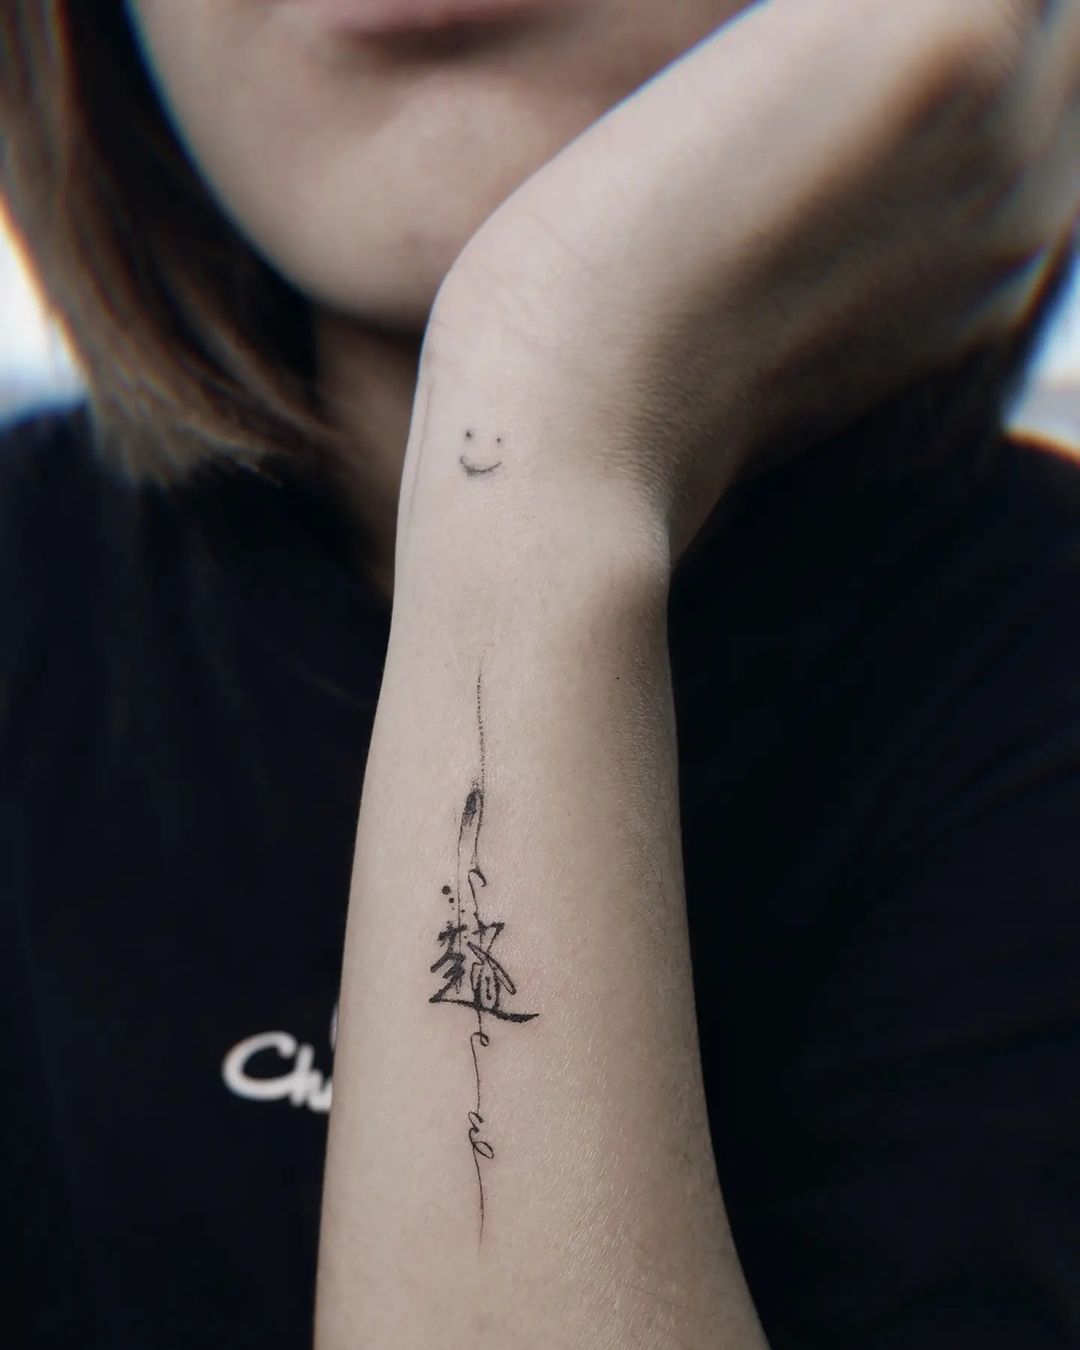 name tattoo design on forearm by tat2lab